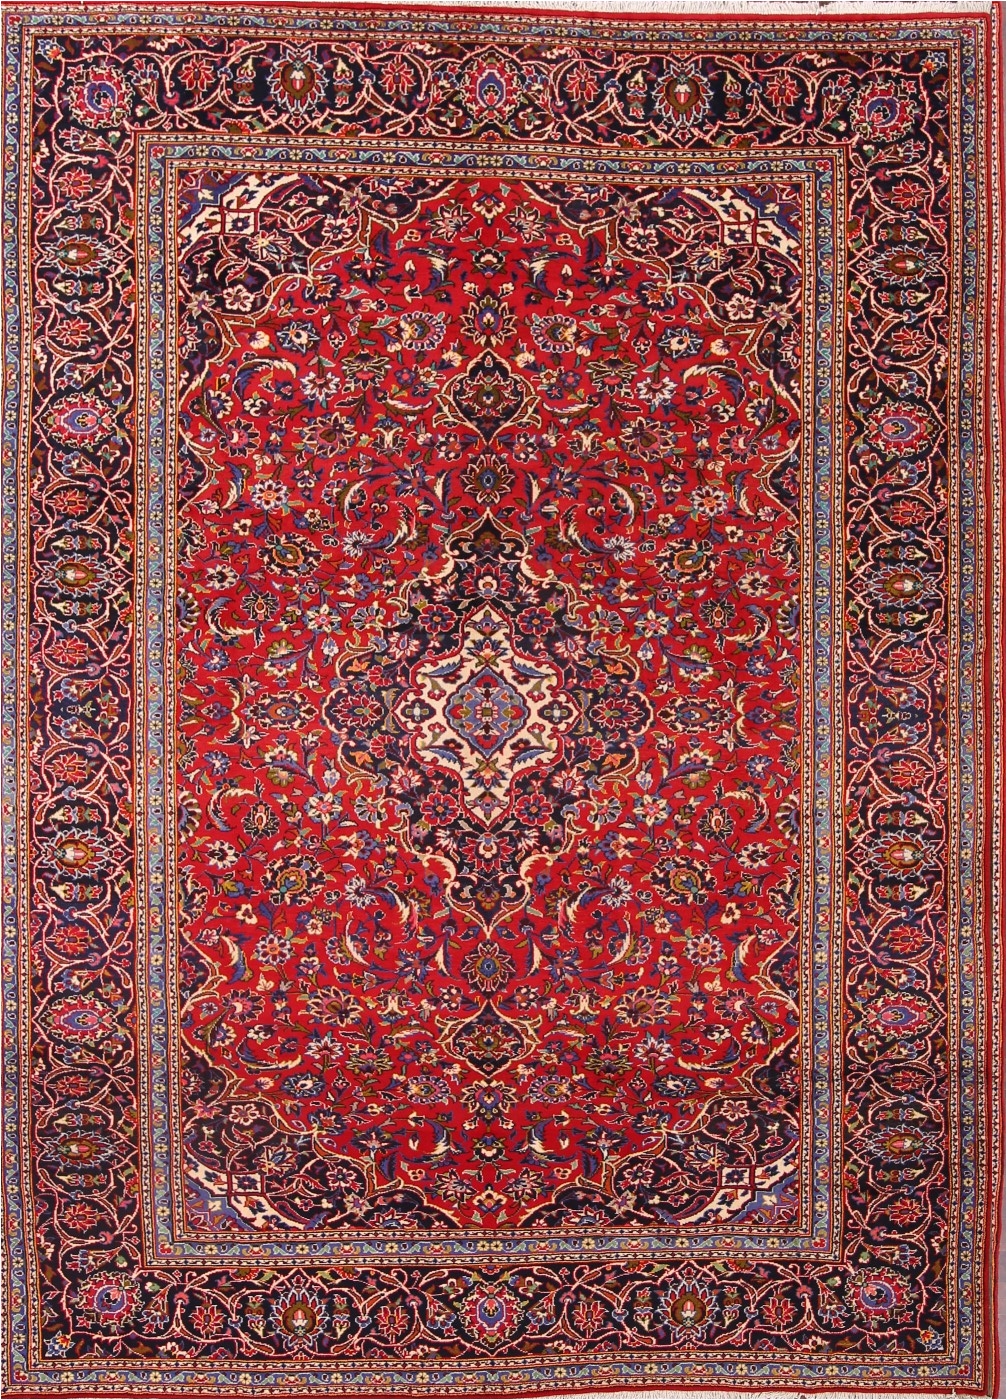 vintage traditional floral 8x12 kashan persian oriental area rug 11 8 x 8 4